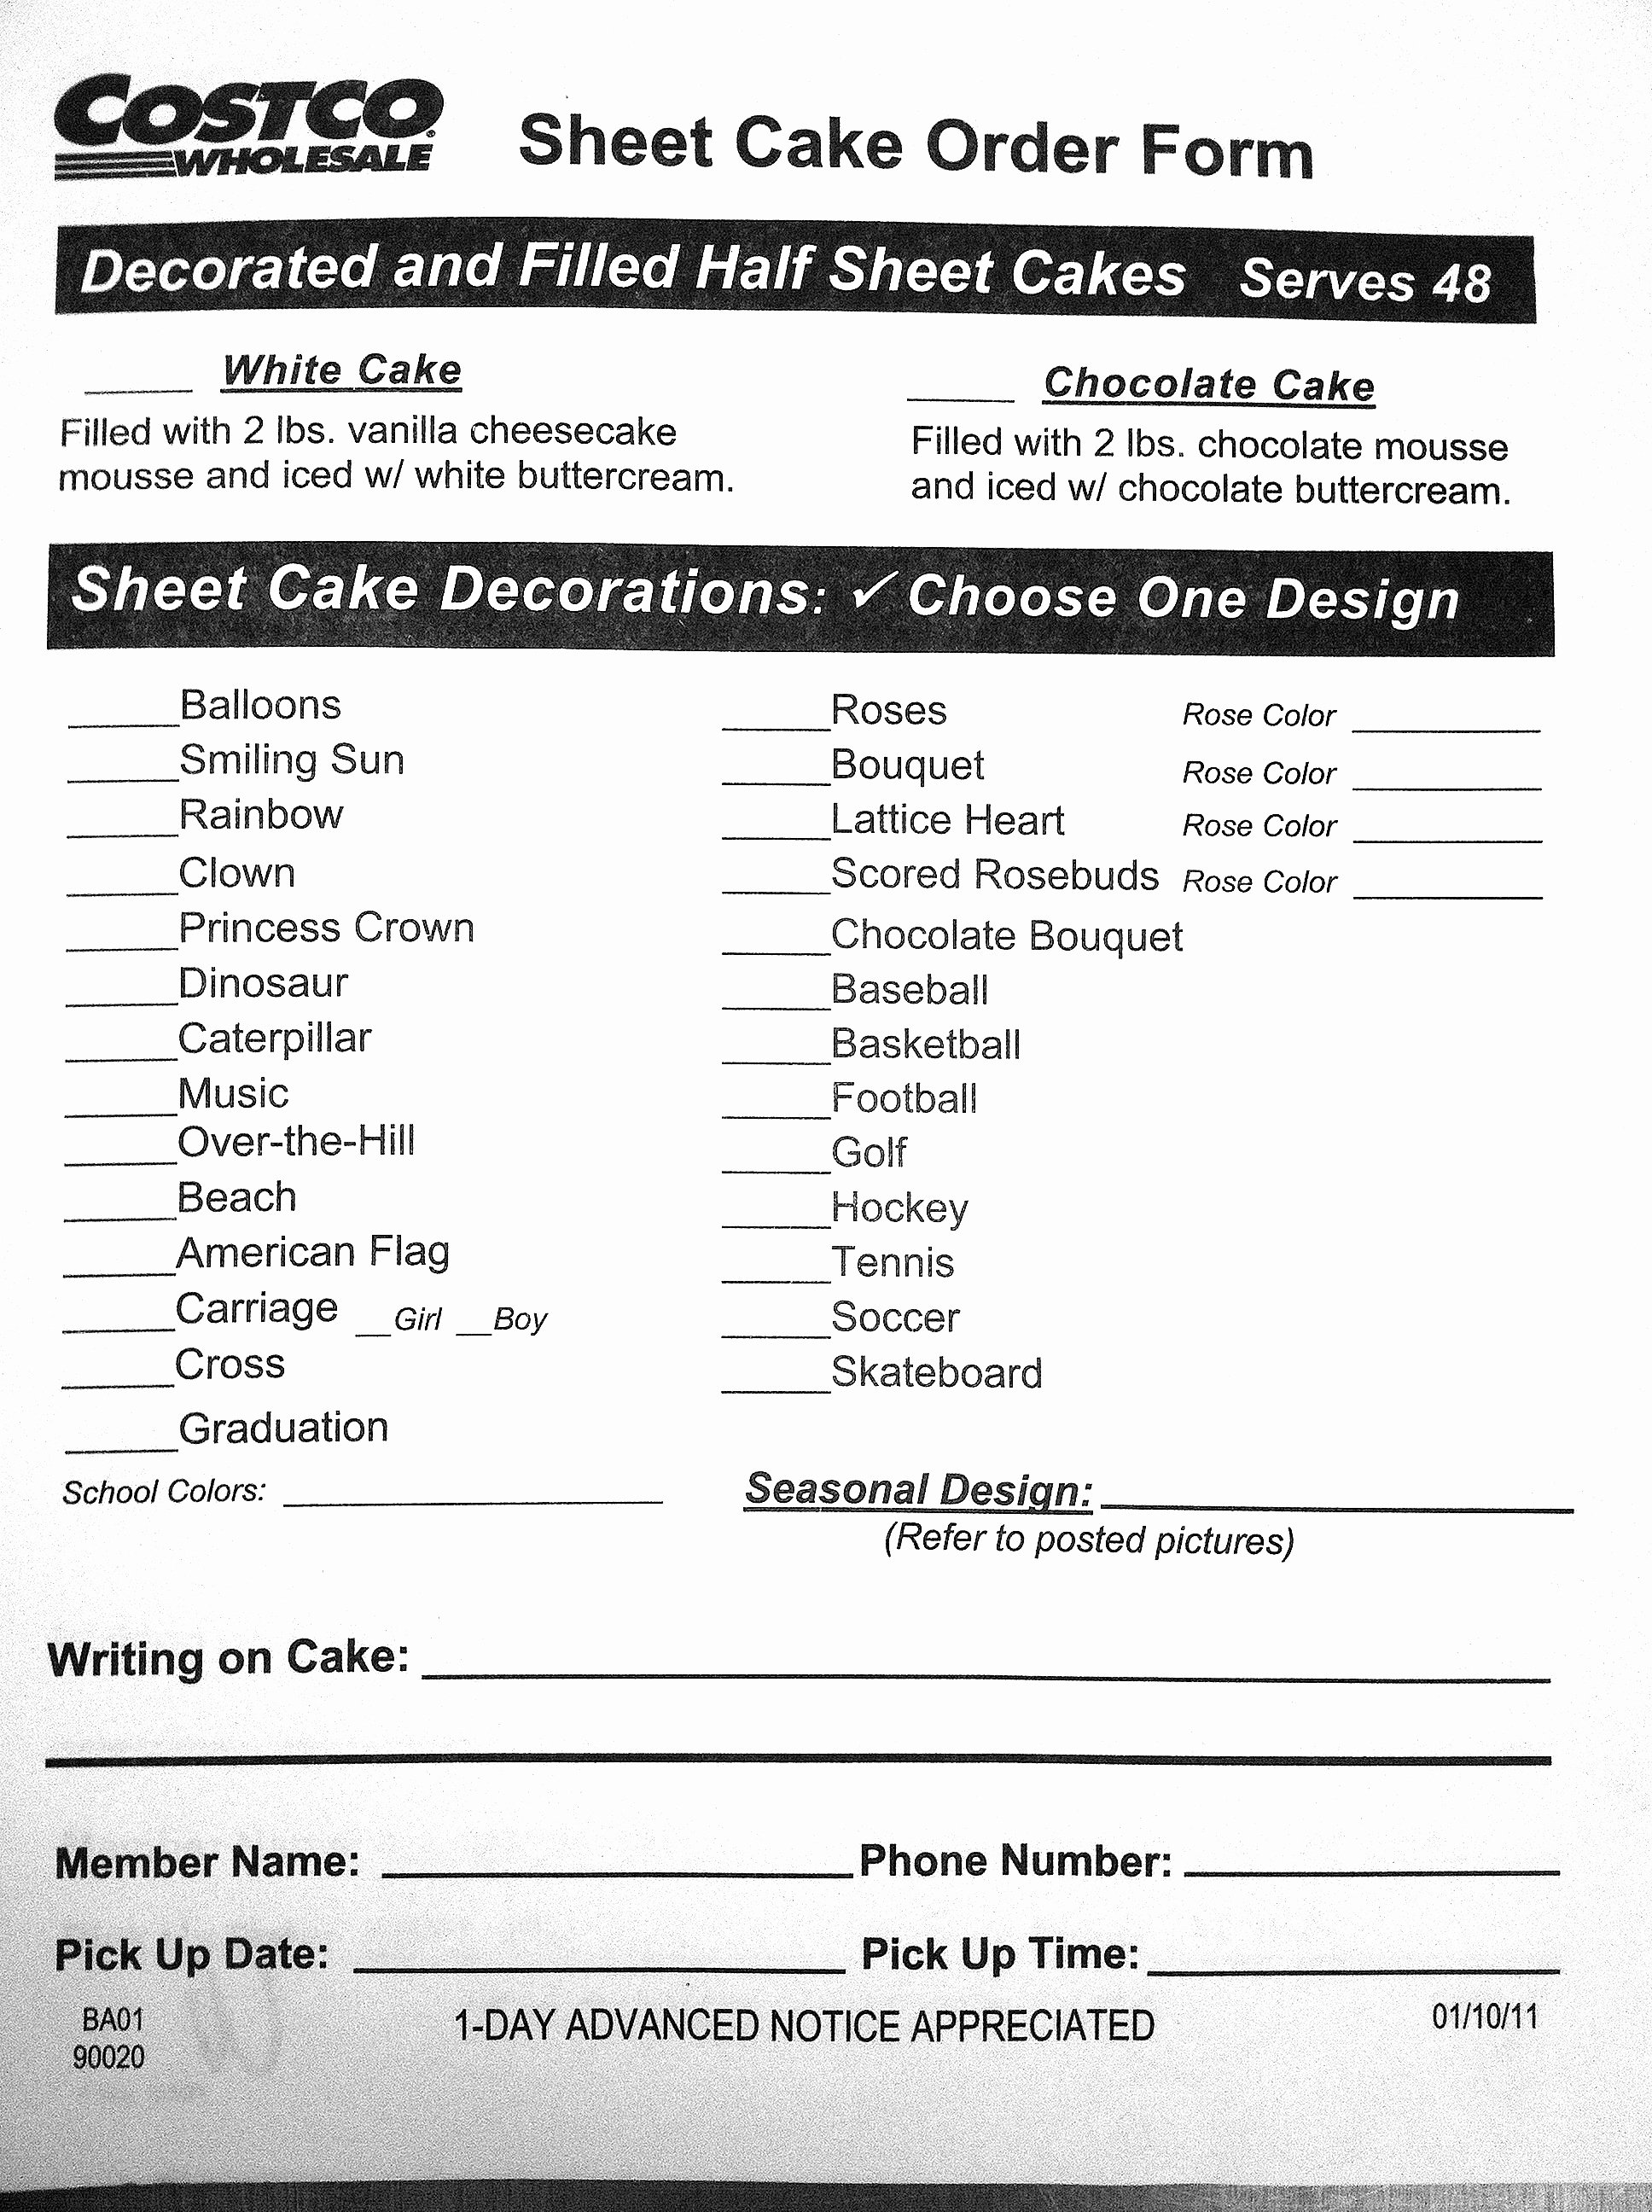 Wedding Cake order form Luxury How Much Does A Costco Sheet Cake Cost